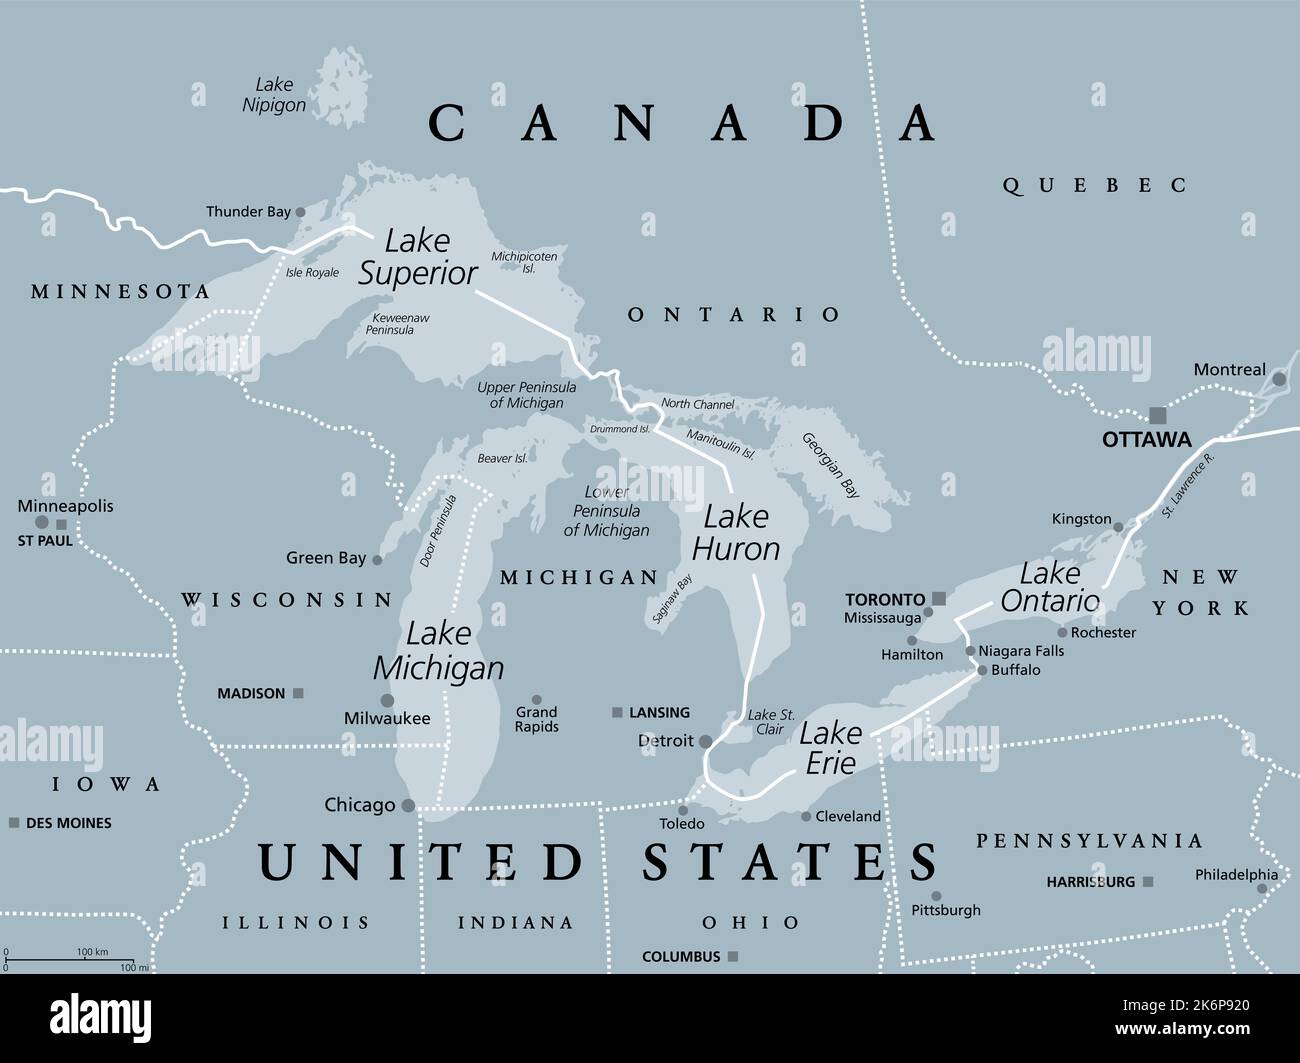 Great Lakes of North America, gray political map. Lakes Superior, Michigan, Huron, Erie and Ontario. Series of large interconnected freshwater lakes. Stock Photo